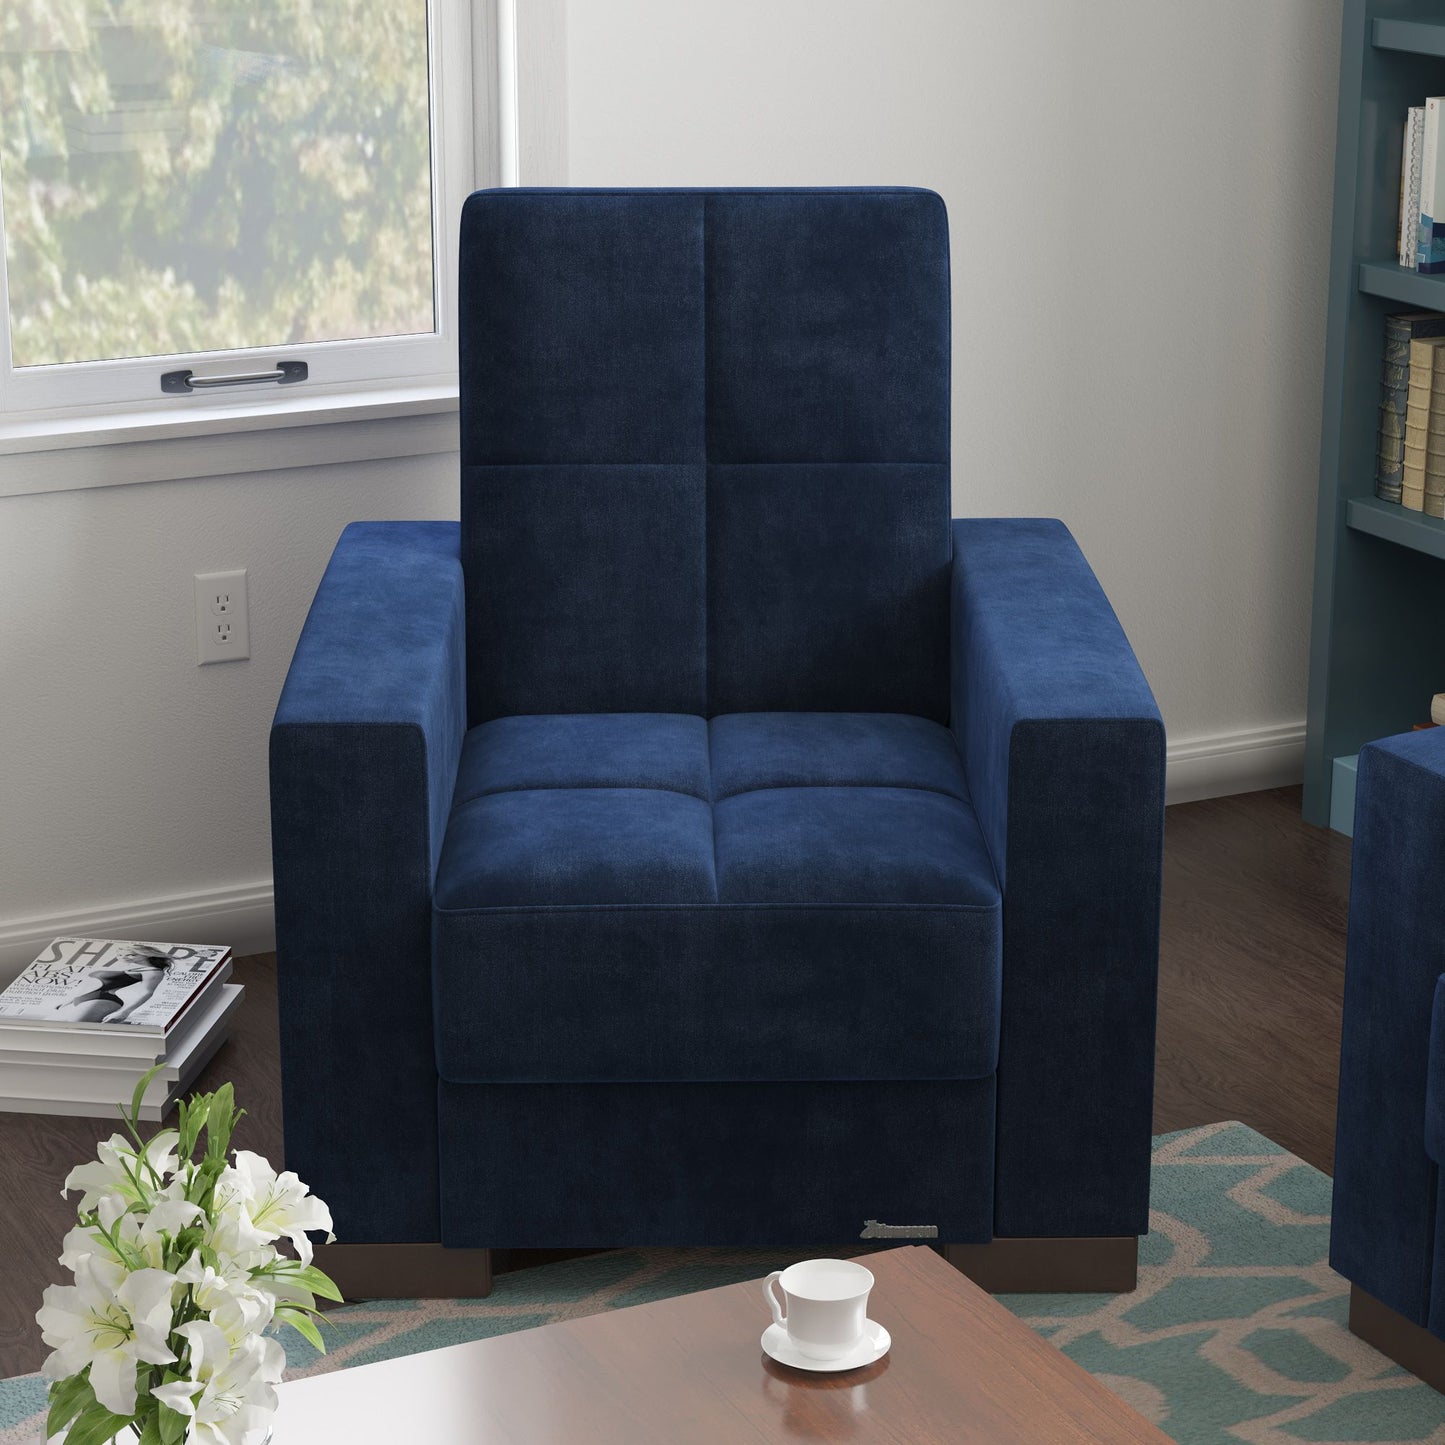 36" Blue Microfiber And Brown Tufted Convertible Chair